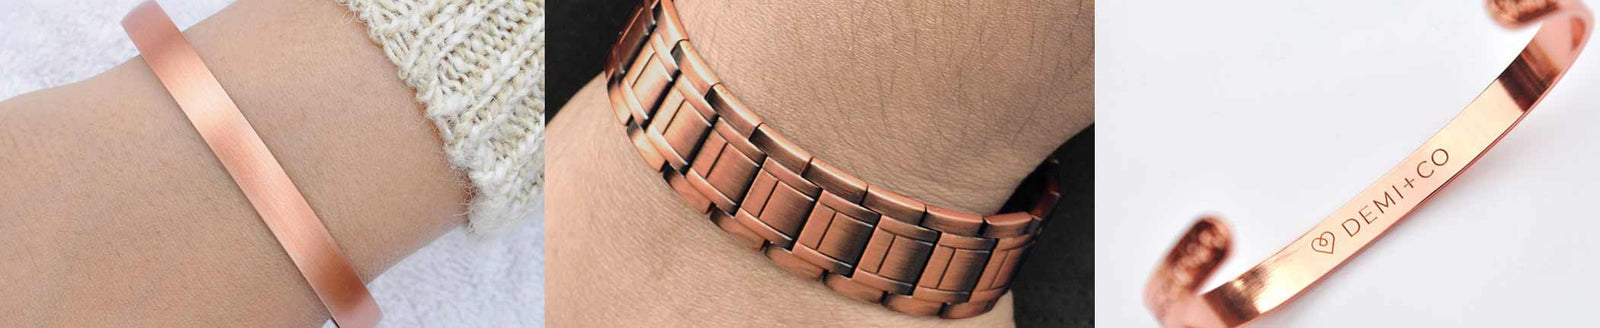 10 Copper Bracelet Benefits That Will Blow Your Mind  Brian Christian